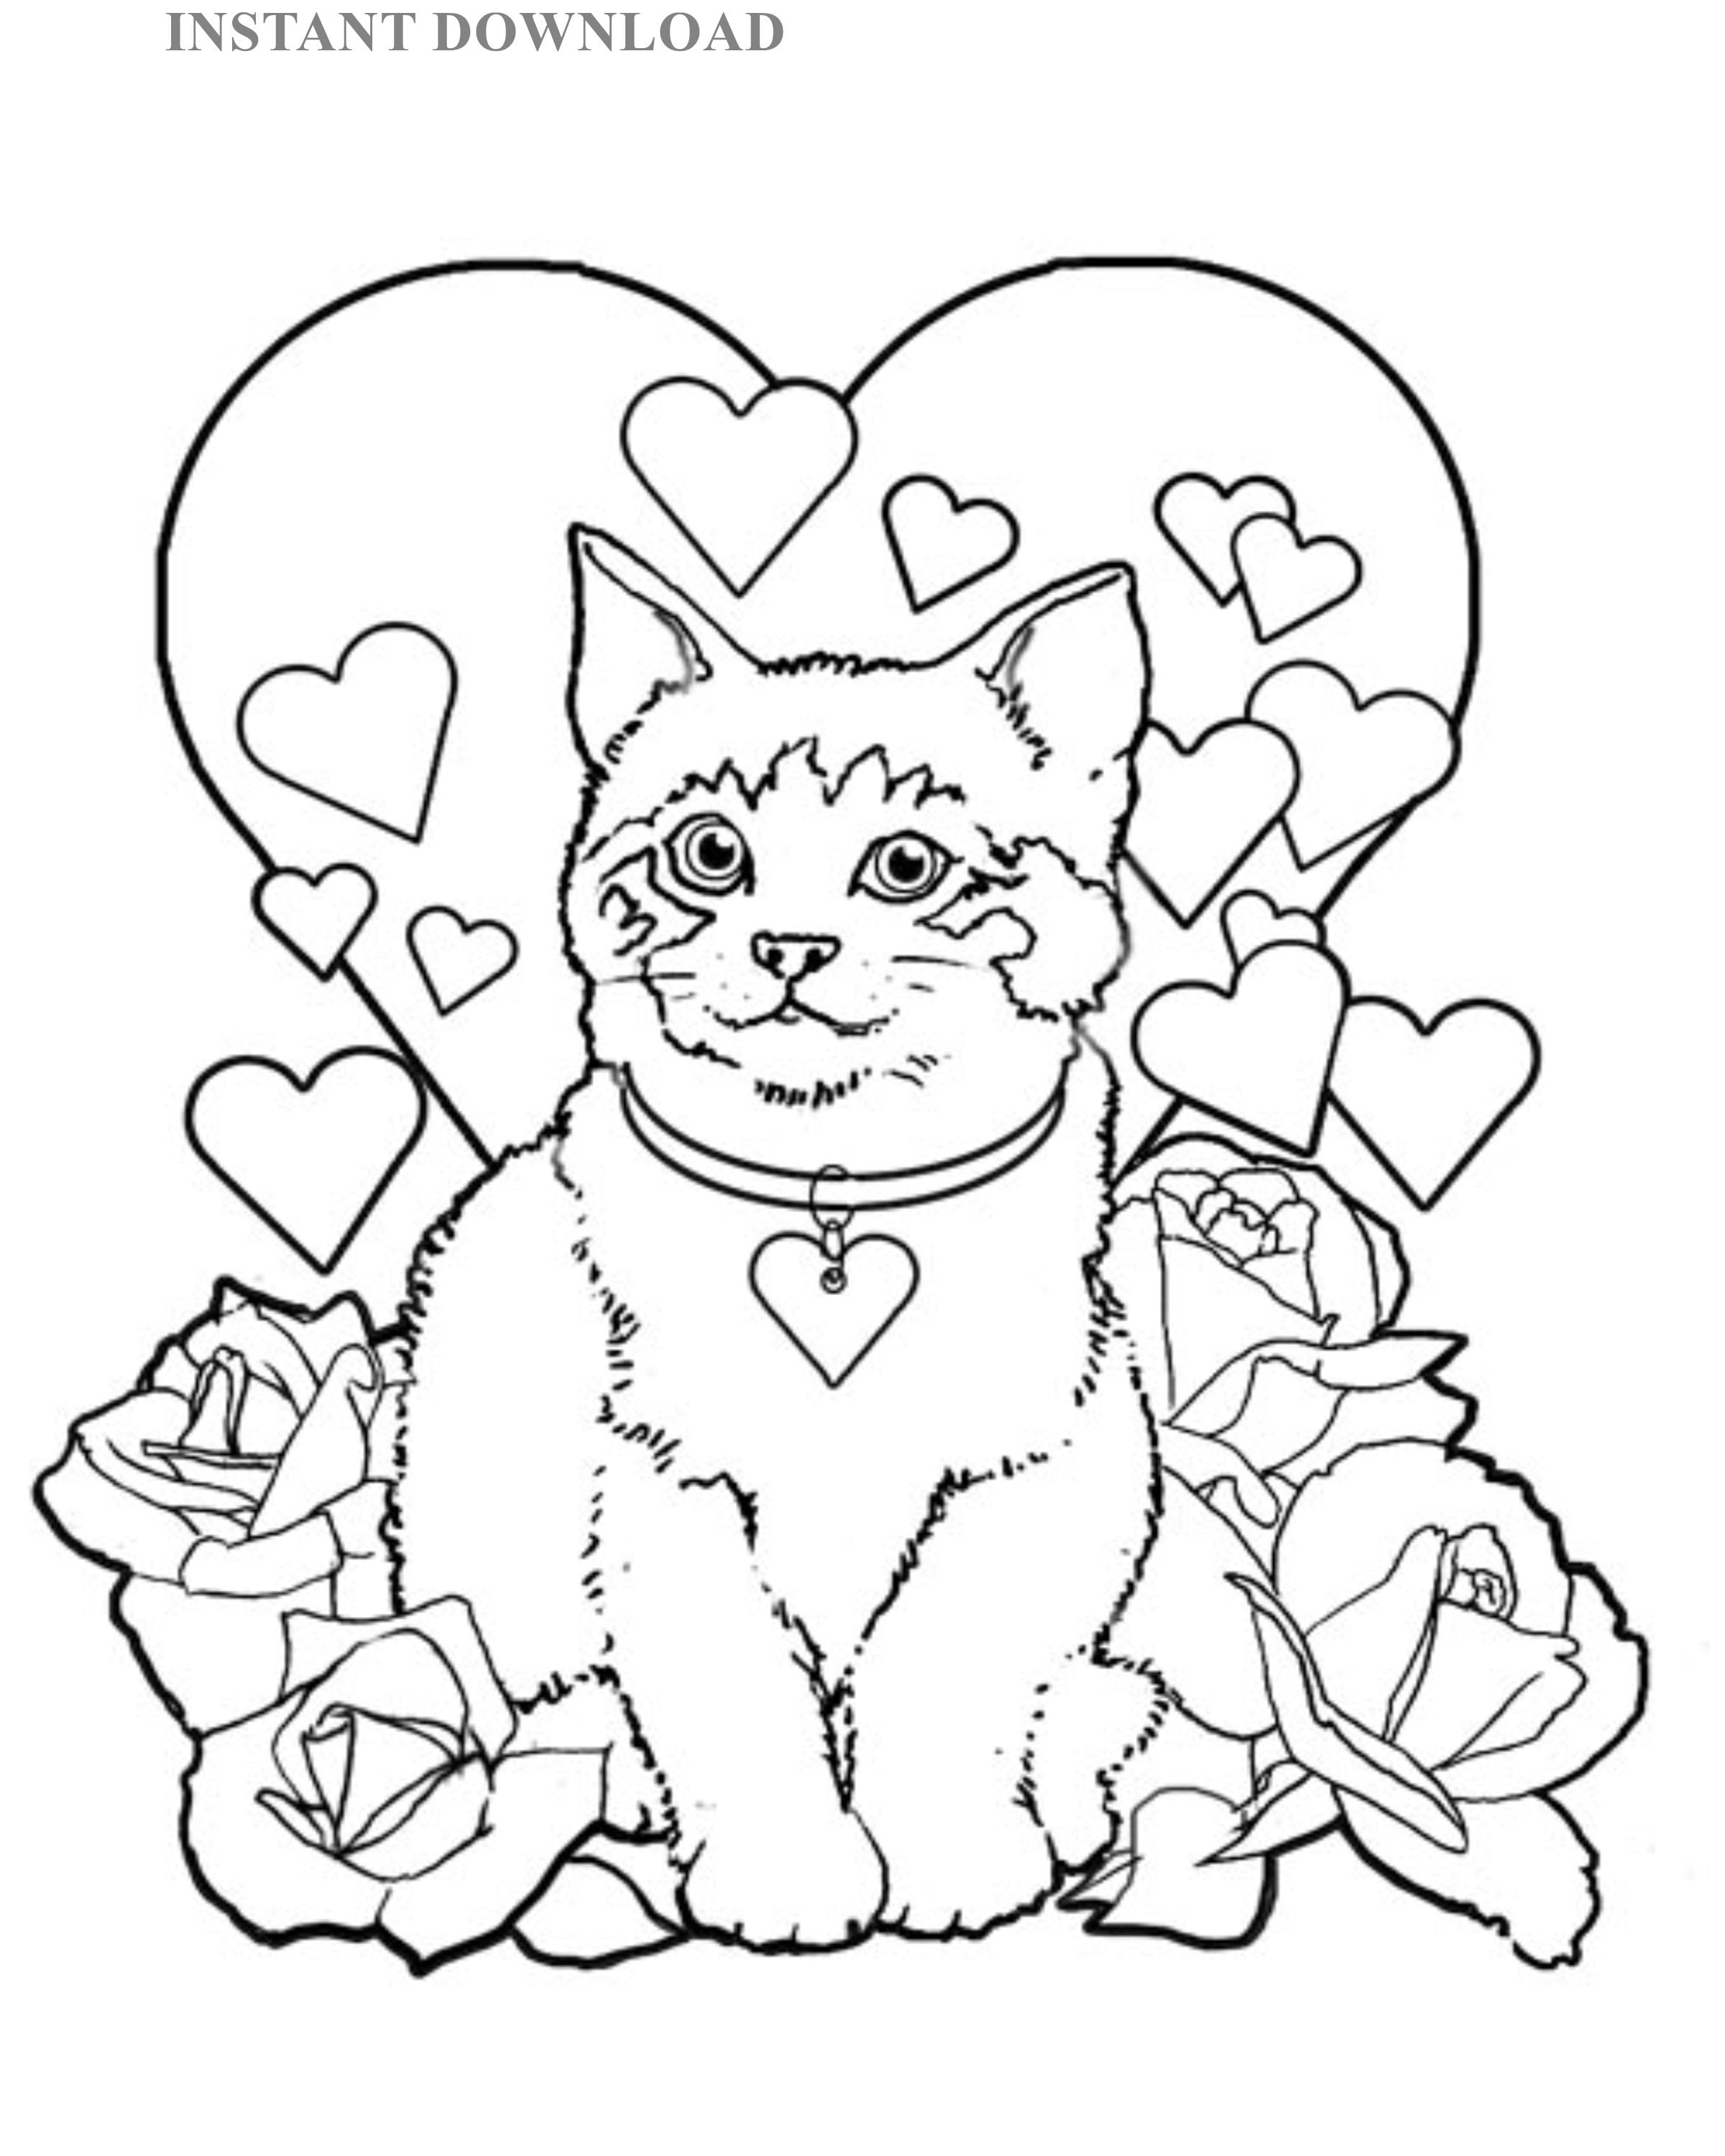 Printable cat hearts and roses coloring sheetinstant downloaddigital file x printable valentineadult coloring download